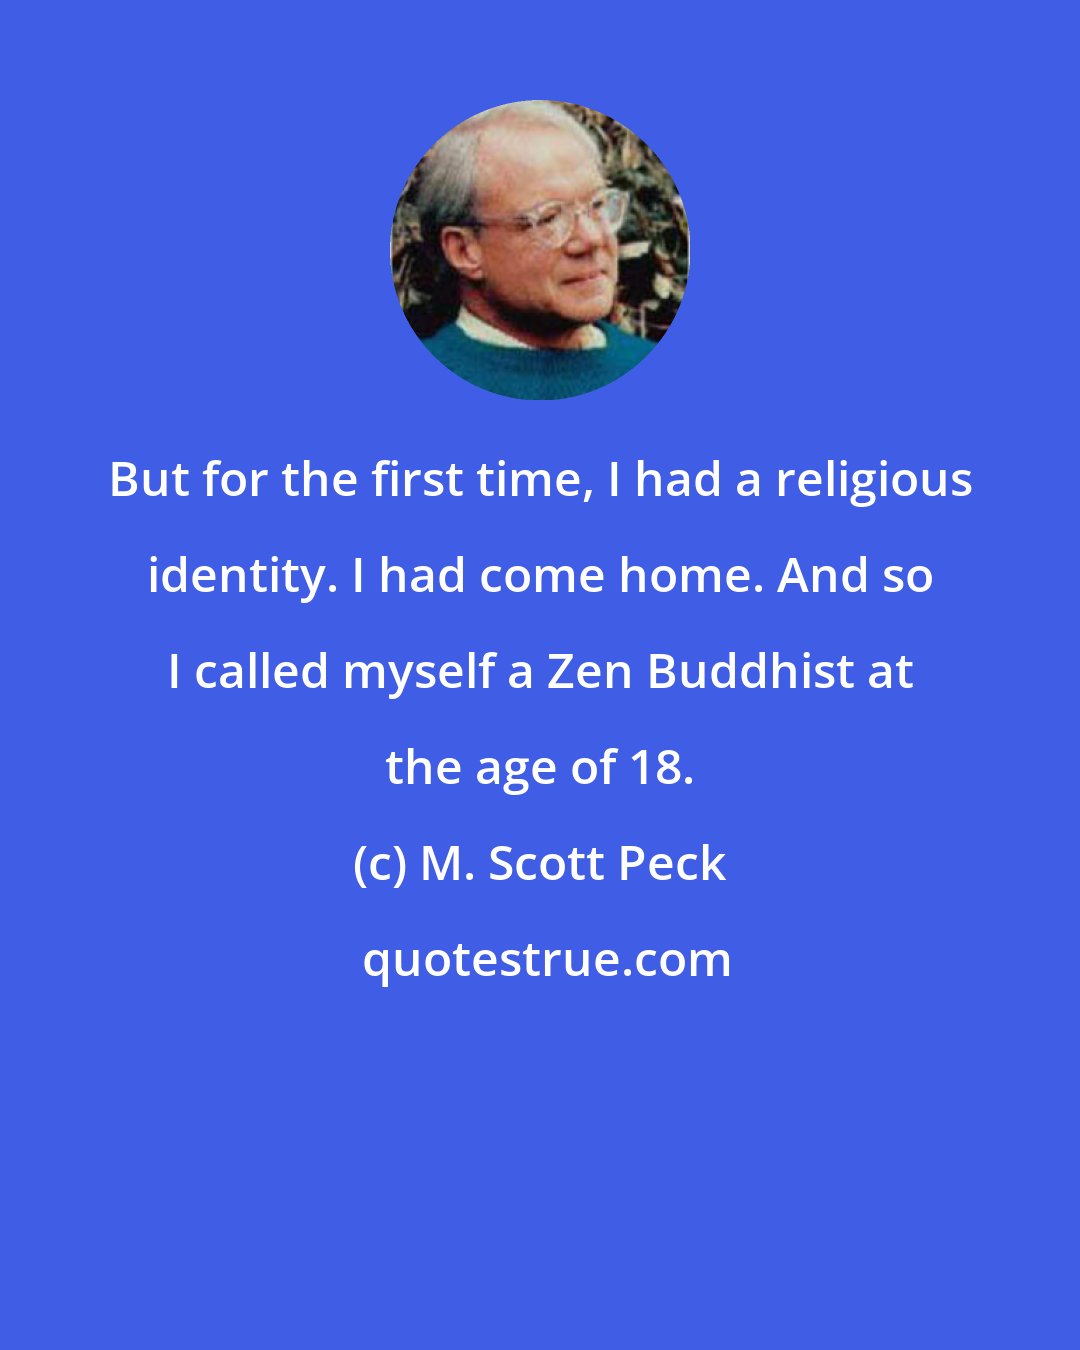 M. Scott Peck: But for the first time, I had a religious identity. I had come home. And so I called myself a Zen Buddhist at the age of 18.